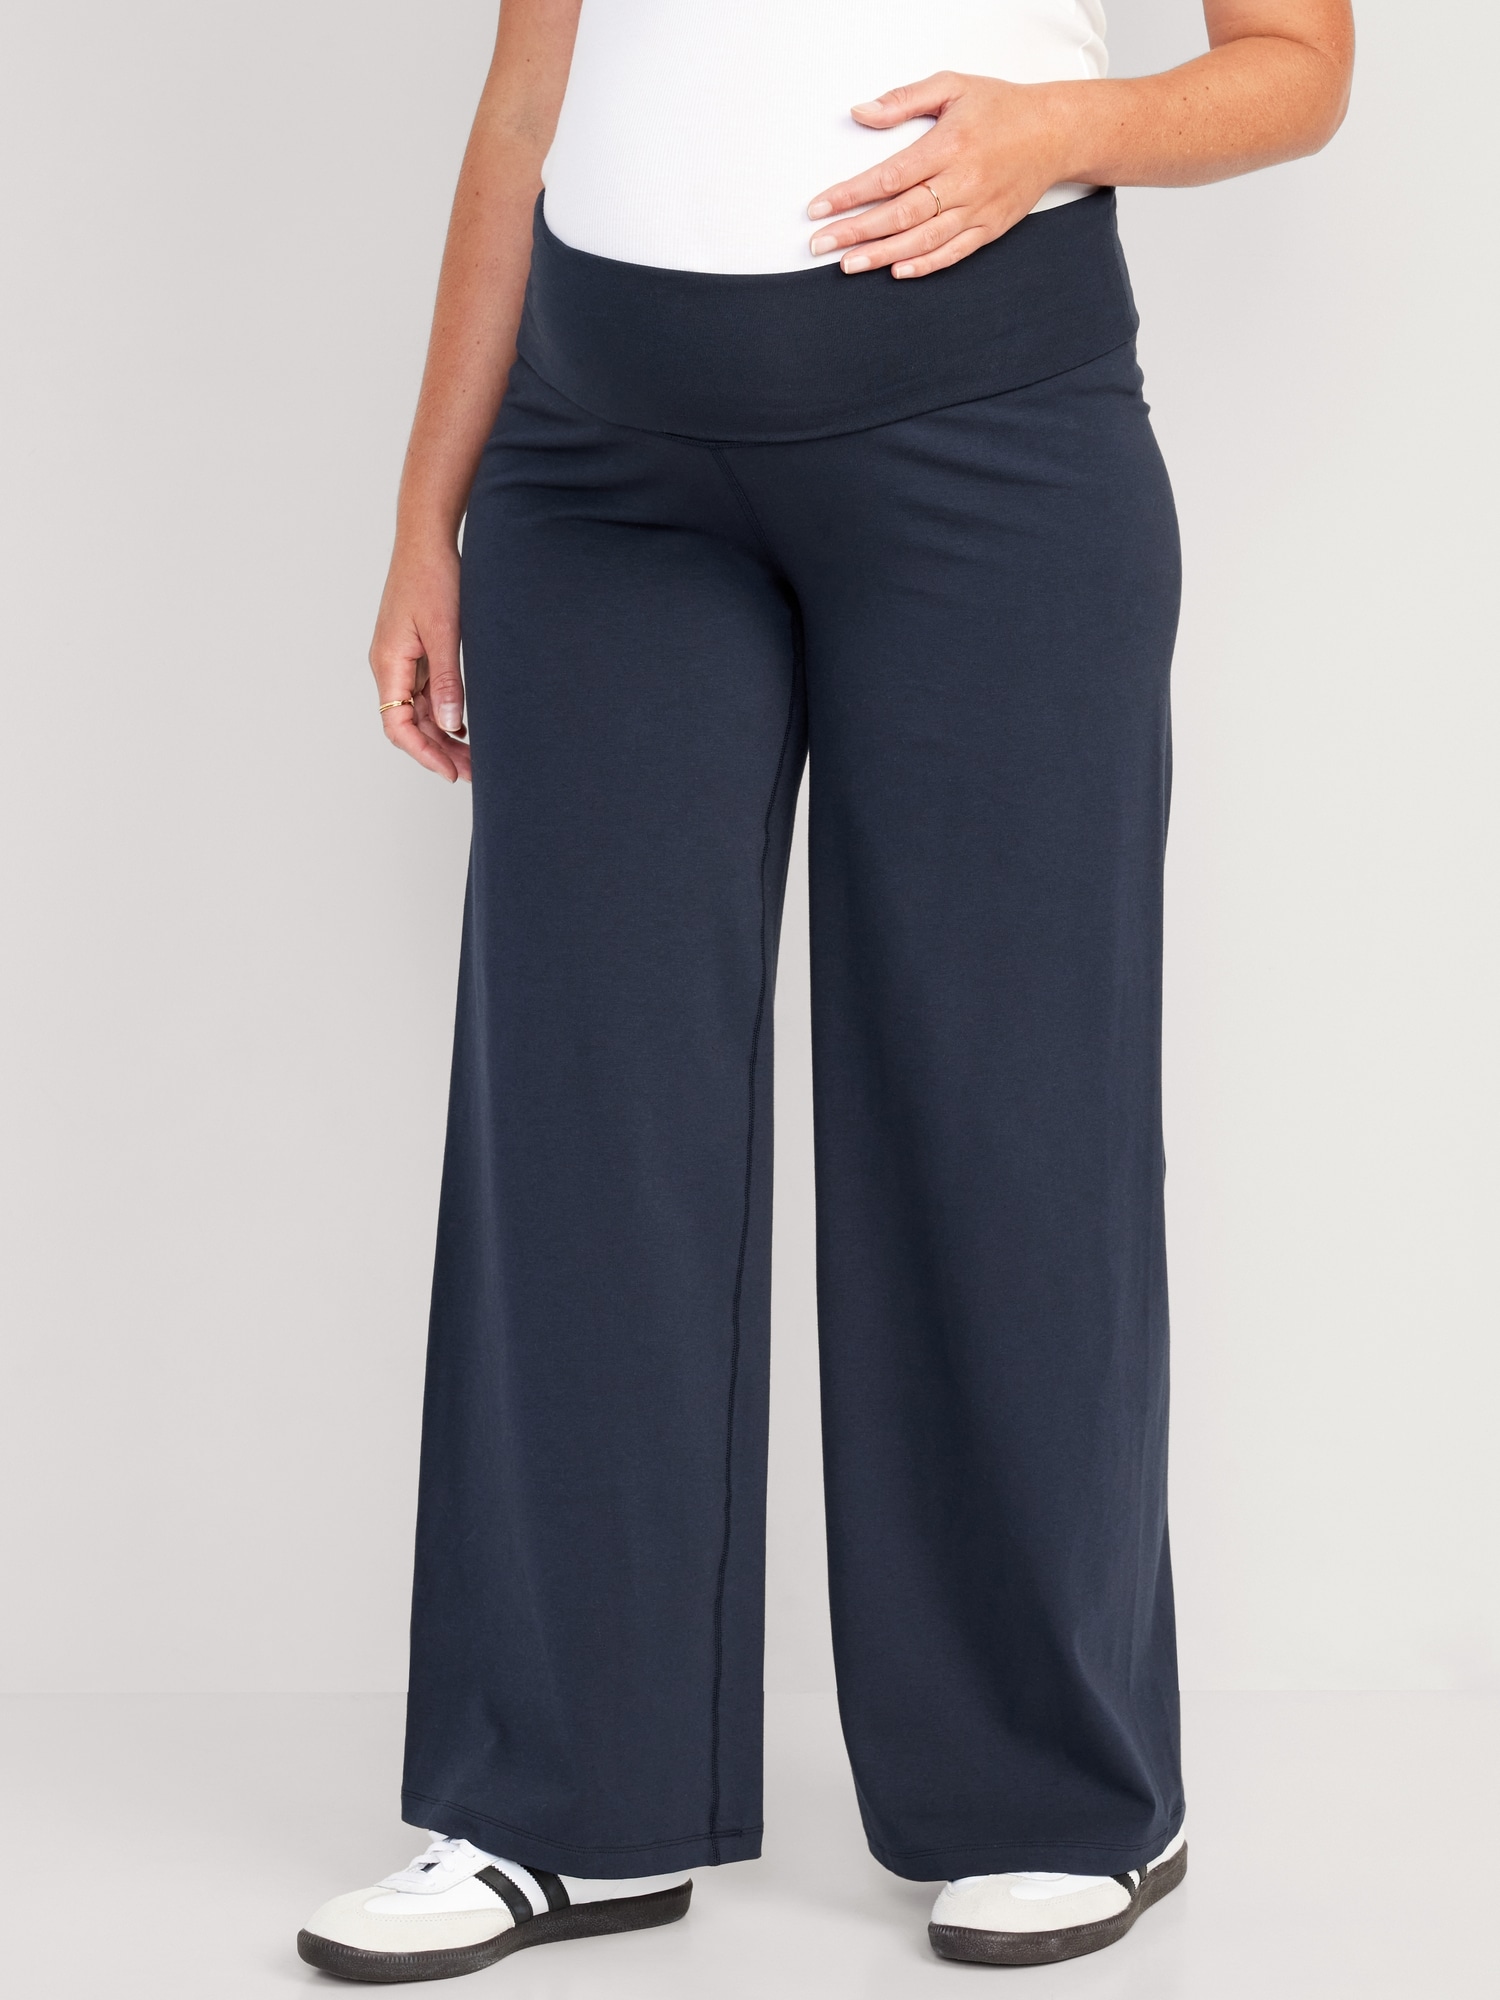 Anewsta Crossed Waistband Trousers